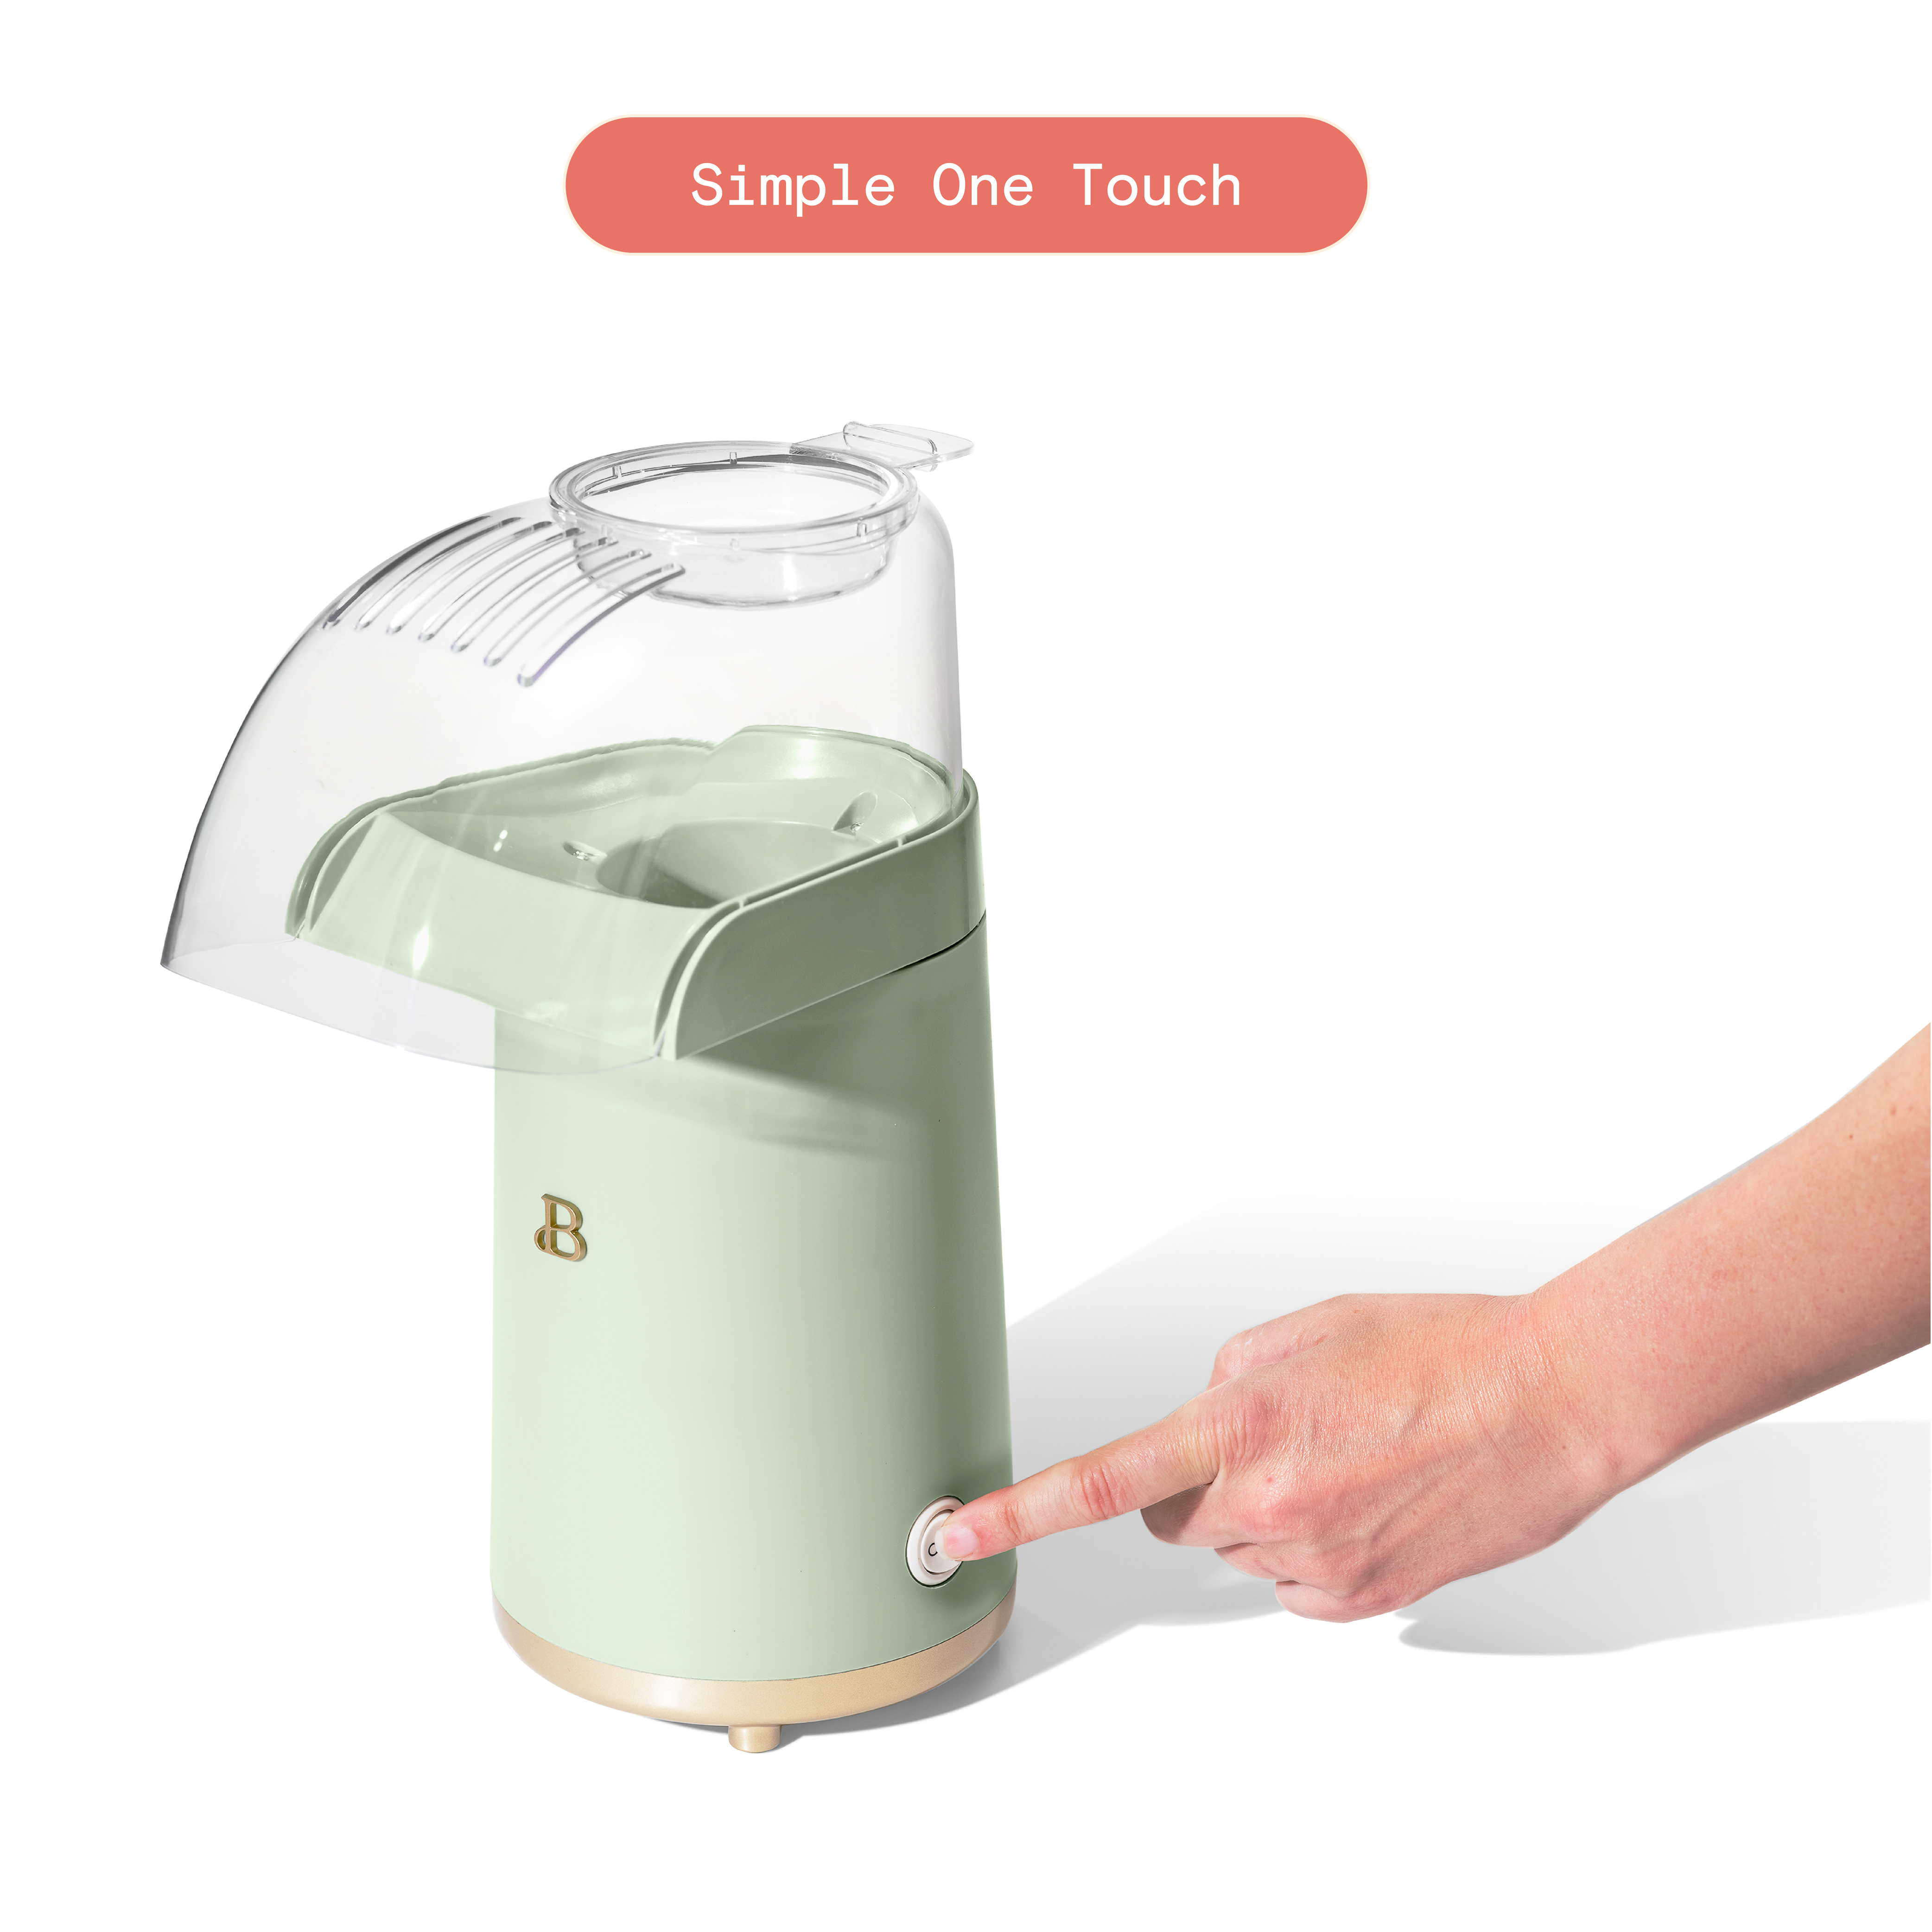 Beautiful 16 Cup Hot Air Electric Popcorn Maker, Sage Green by Drew Barrymore - image 9 of 13